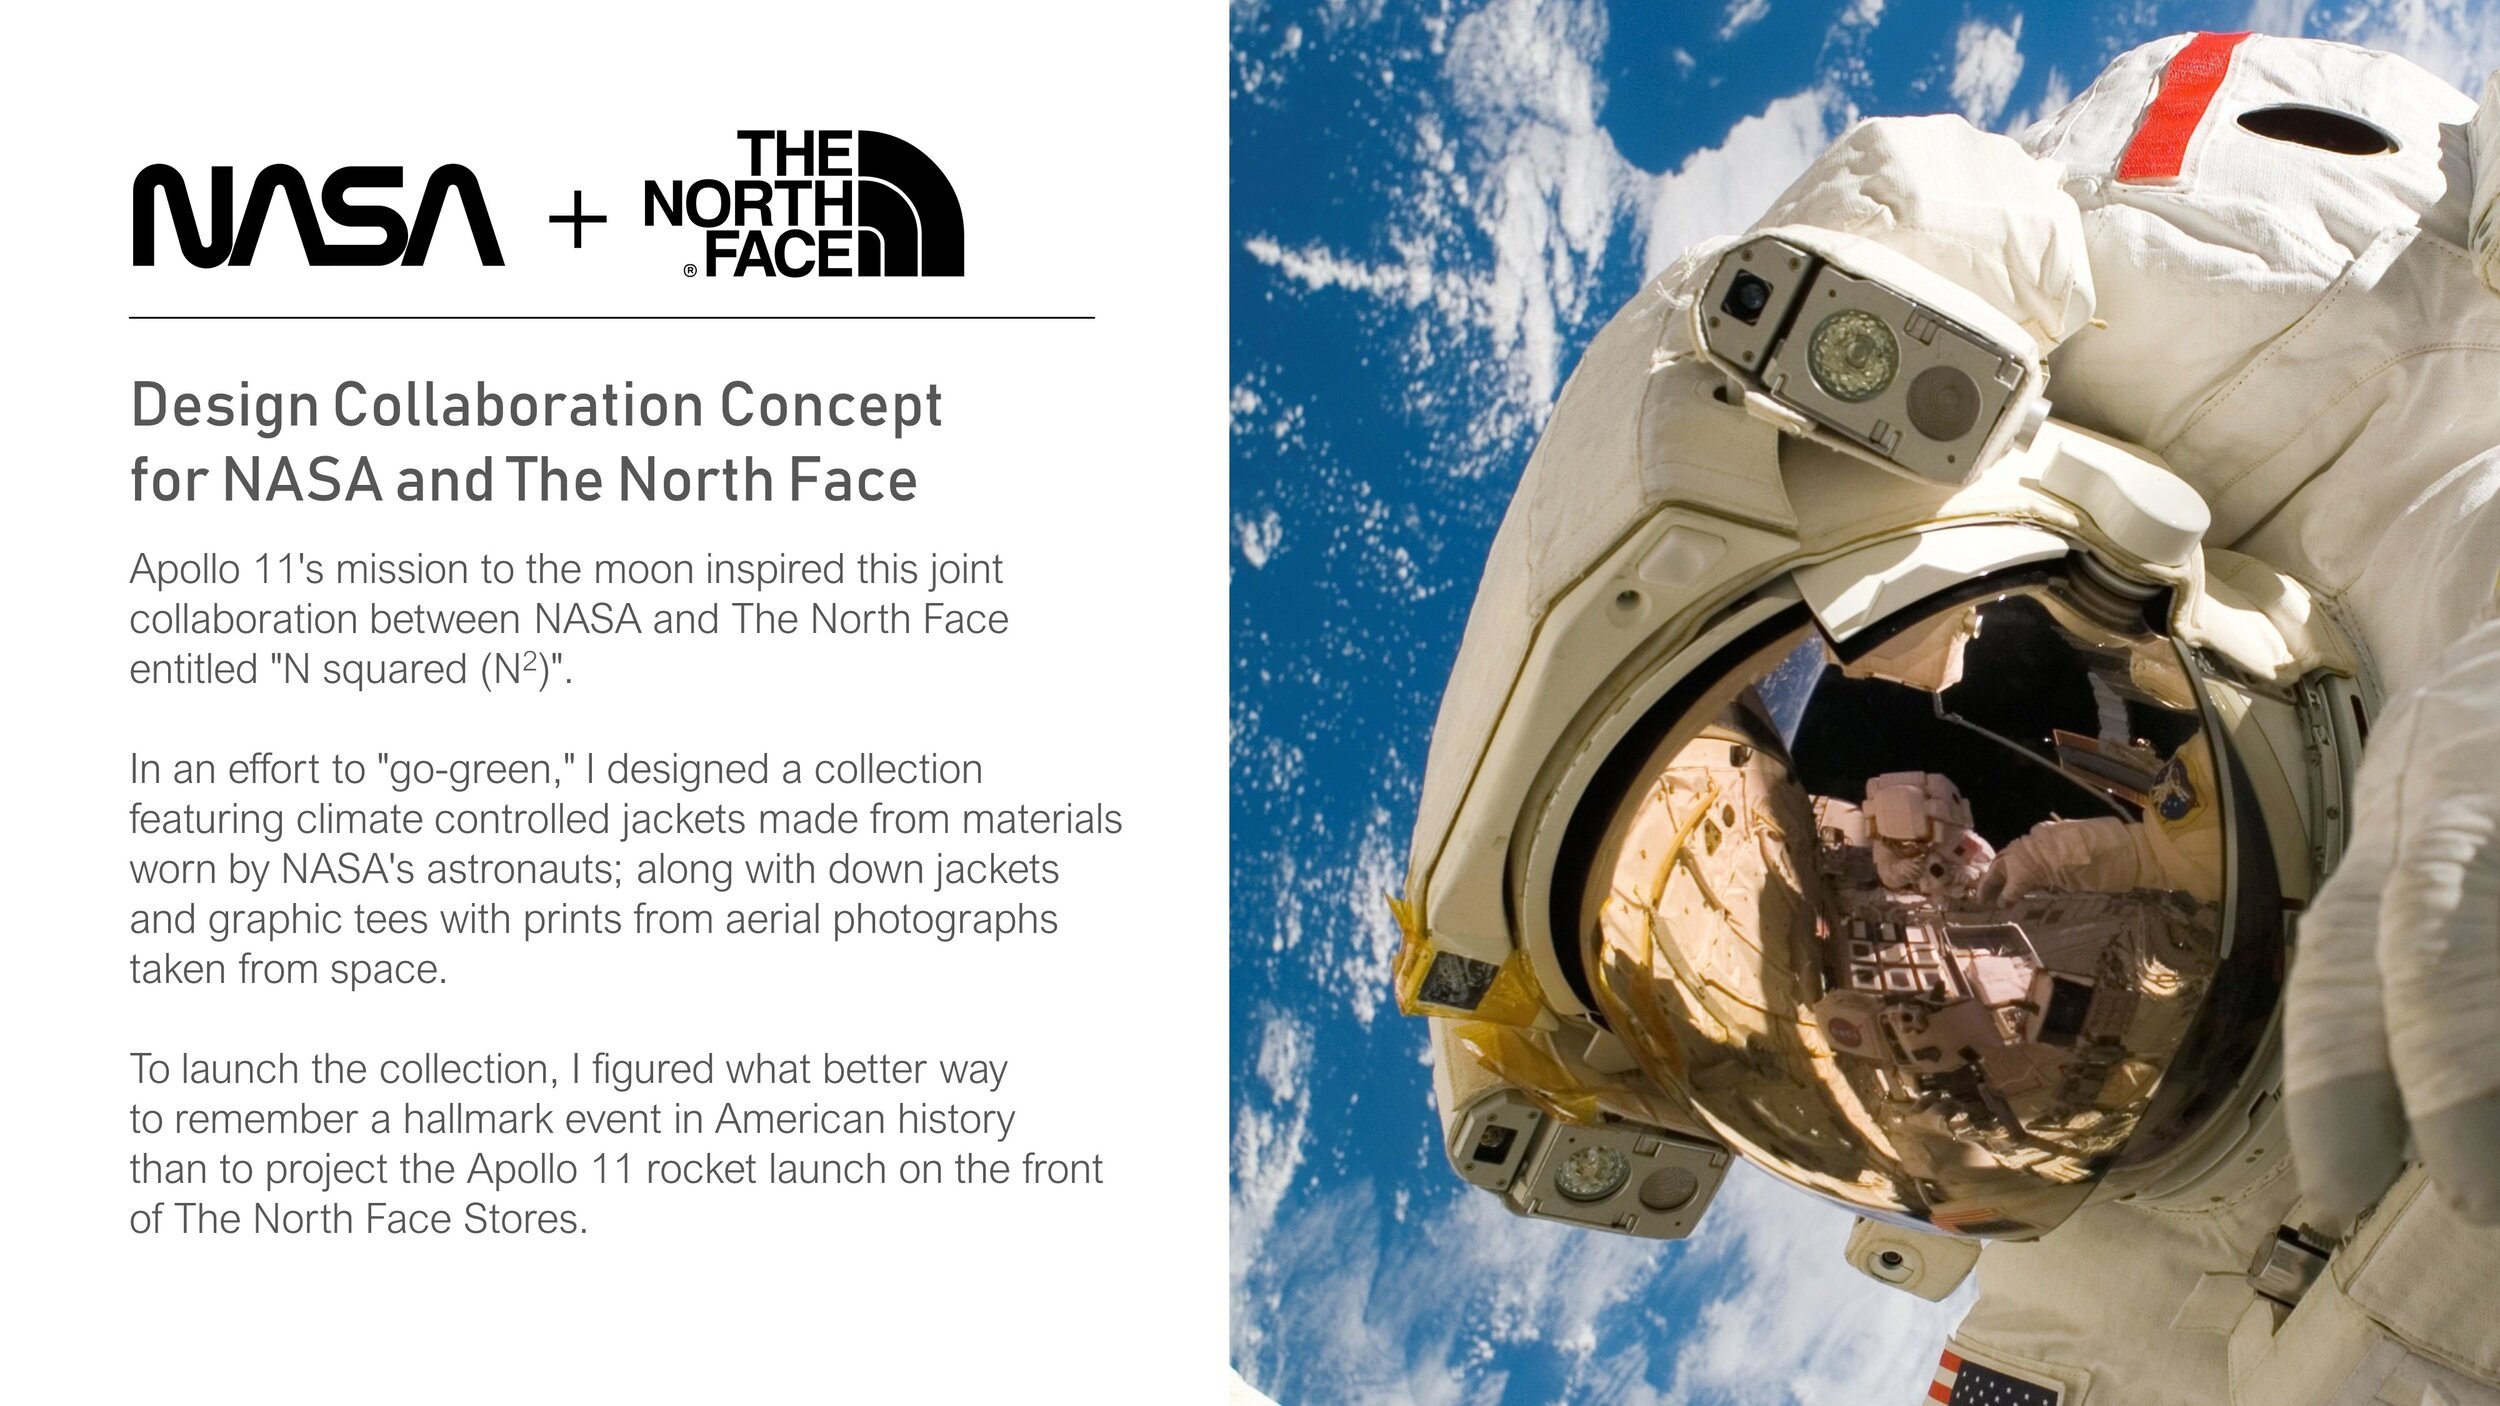 the north face history